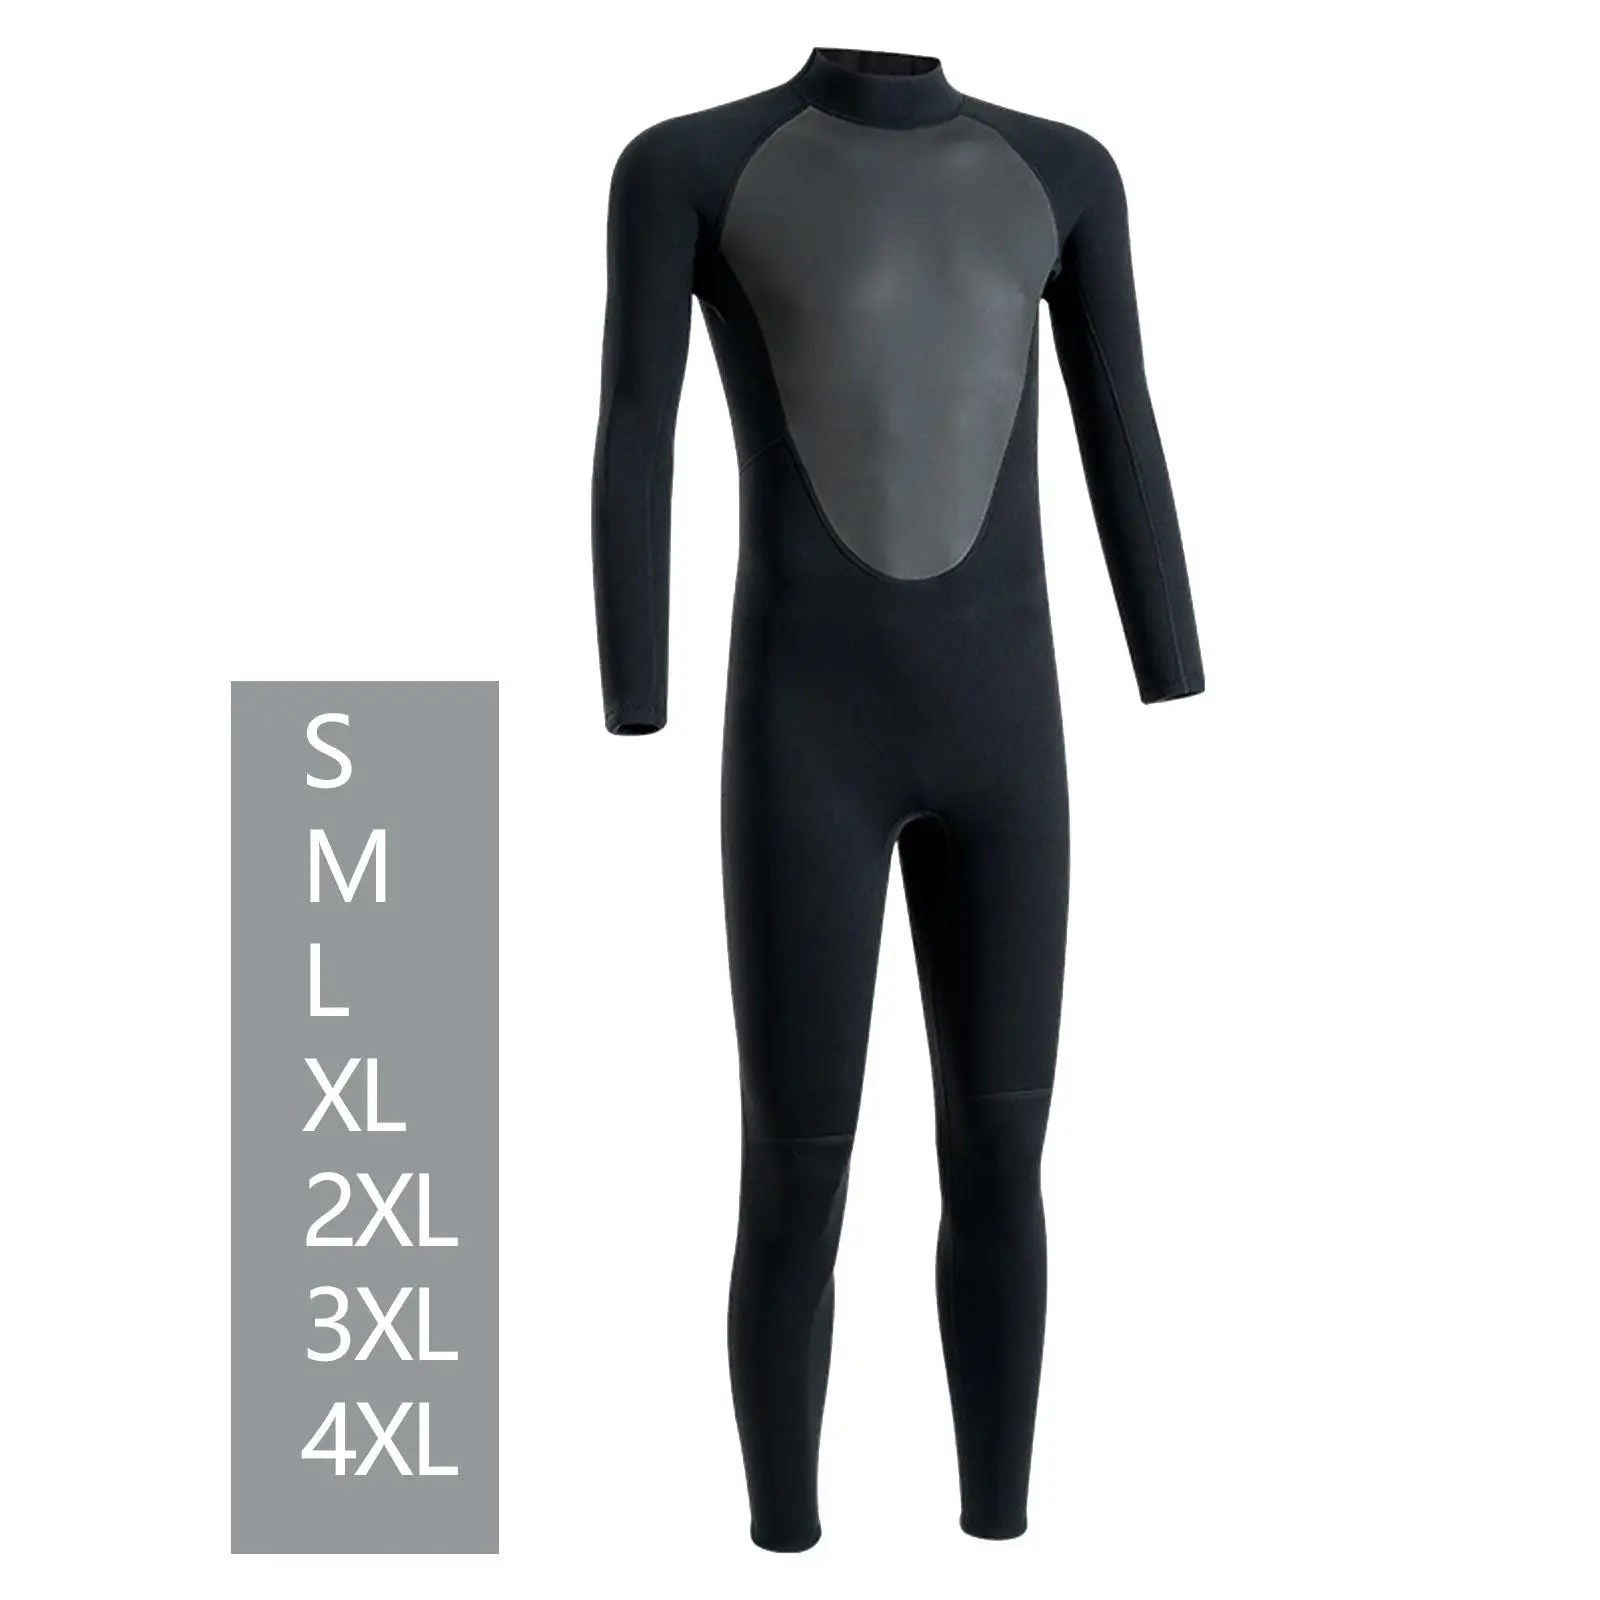 Full Wetsuit Full Body Wet Suit Surfing Suit Scuba Diving Suit for Water Sports